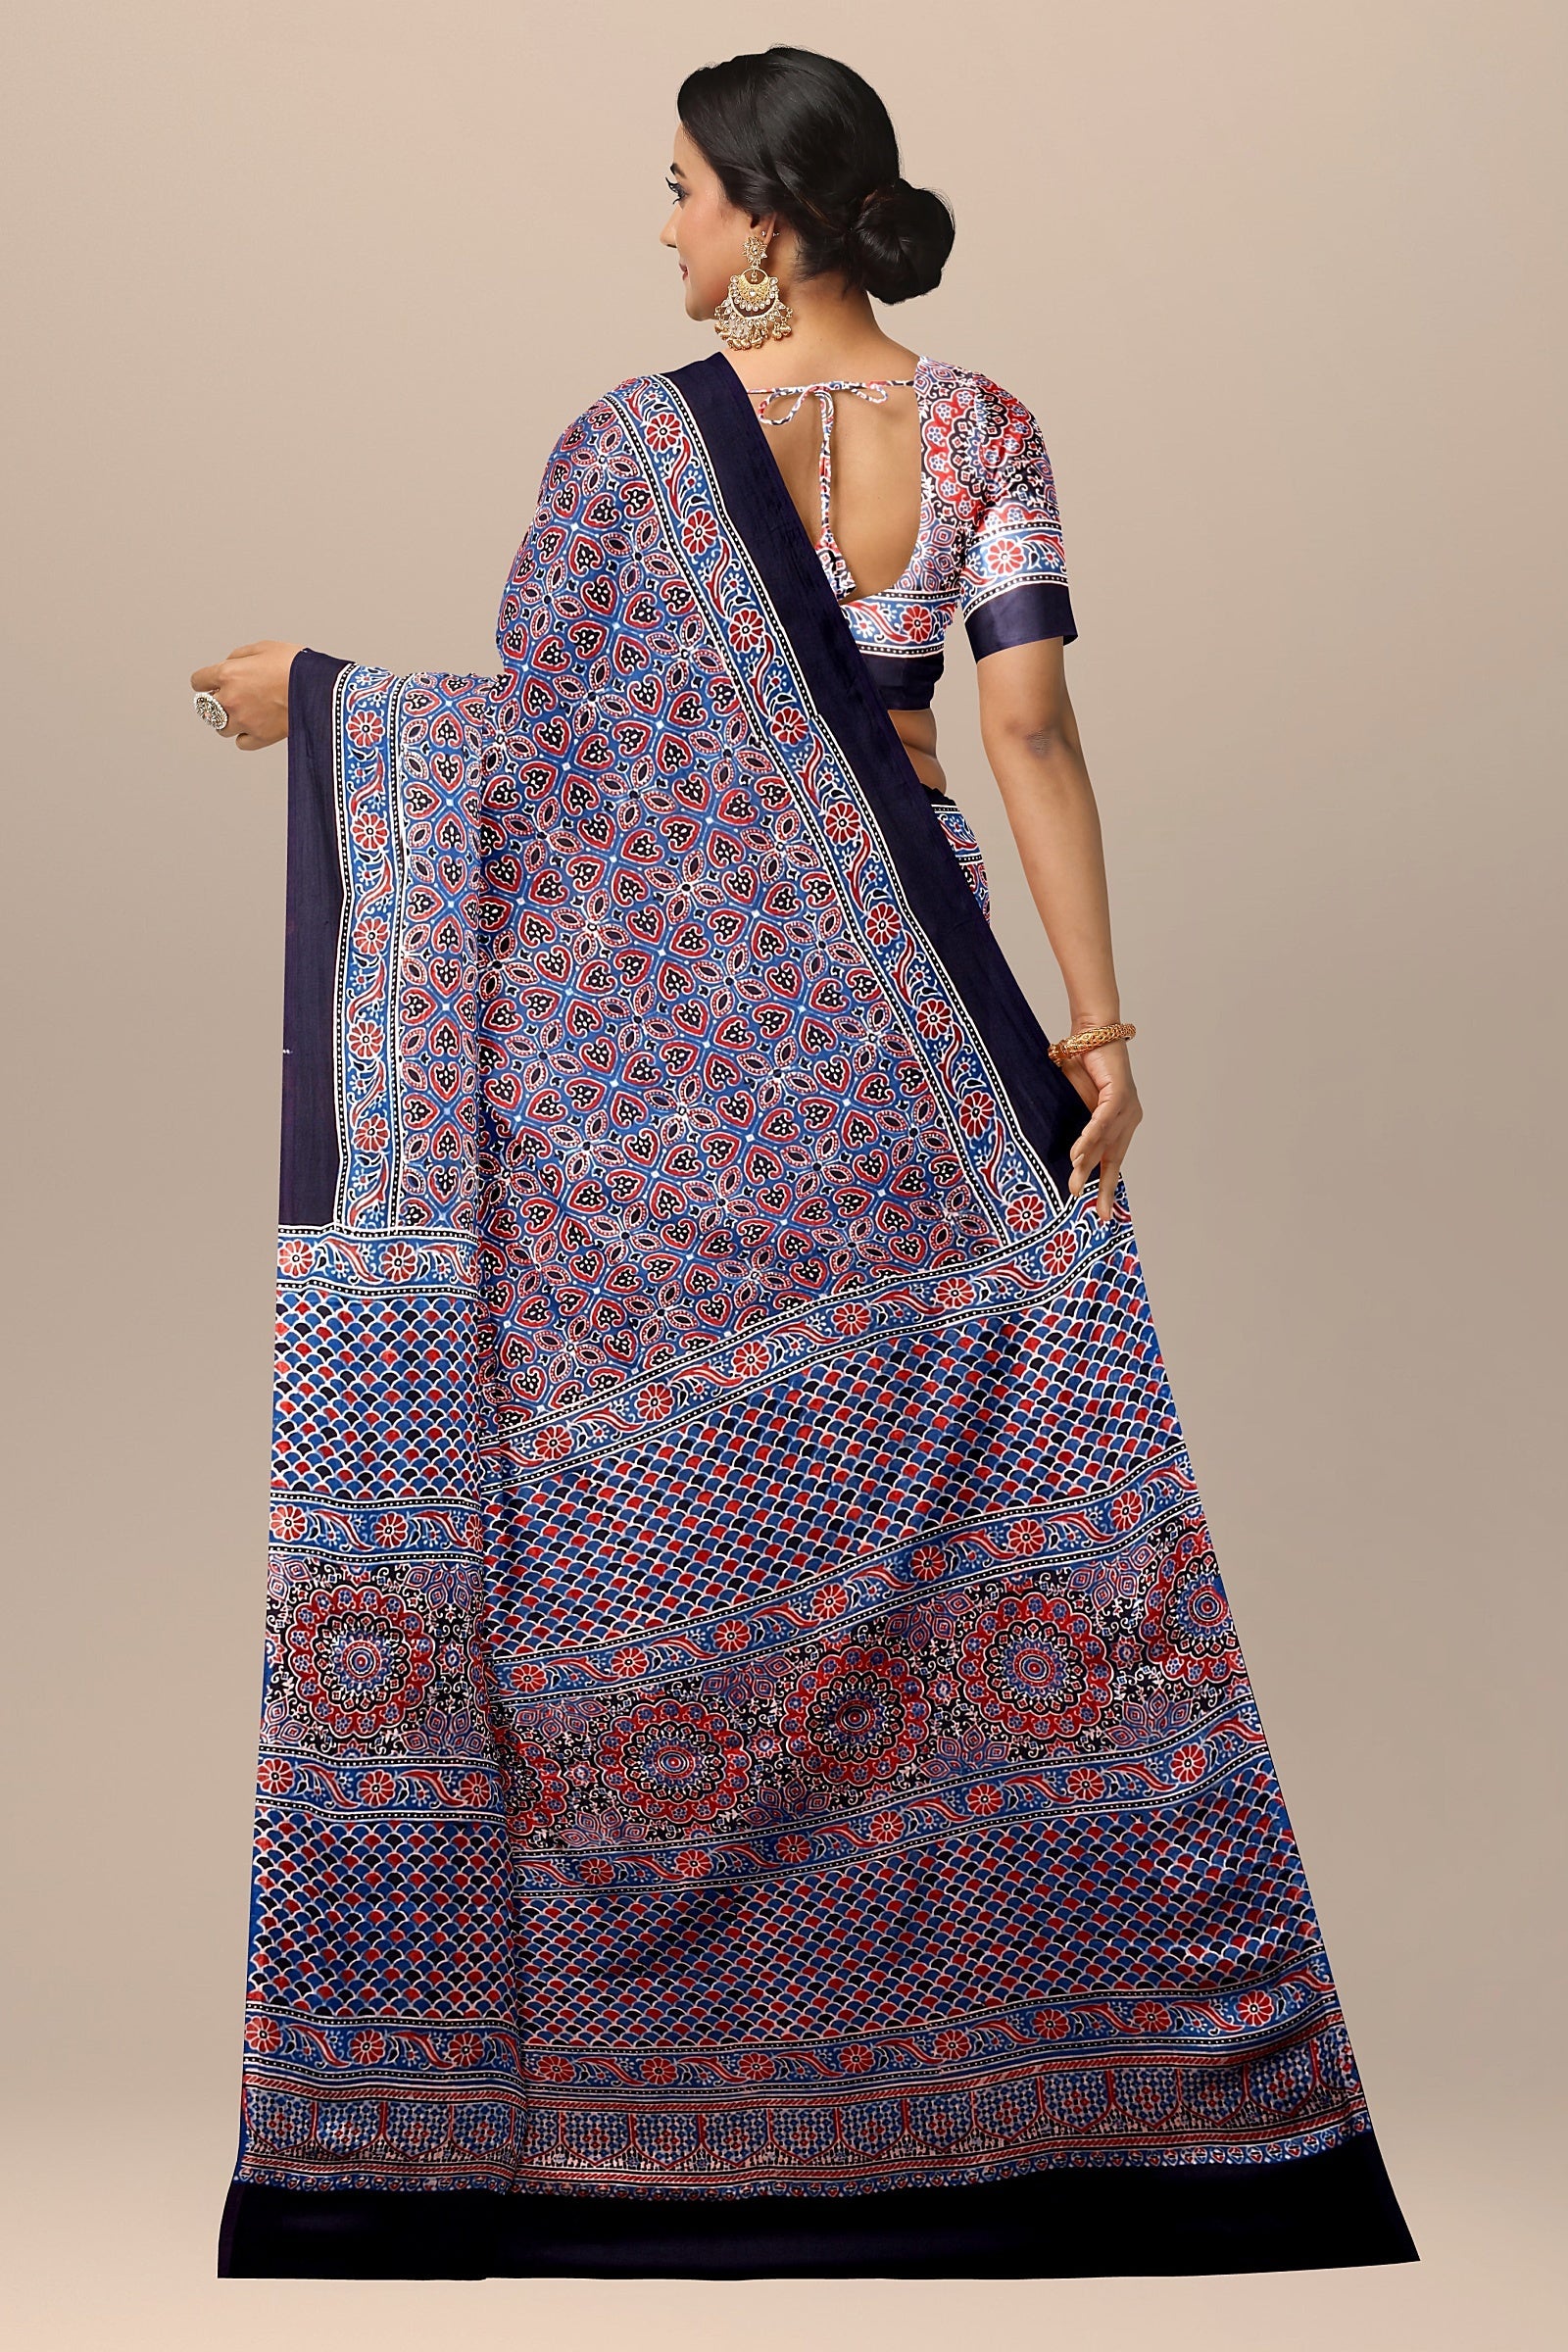 Traditional Ajrakh Hand Block Printed Black Color Modal Silk Saree with Blue and Red Floral and Geometrical Print   SKU-BS10147 - Bhartiya Shilp